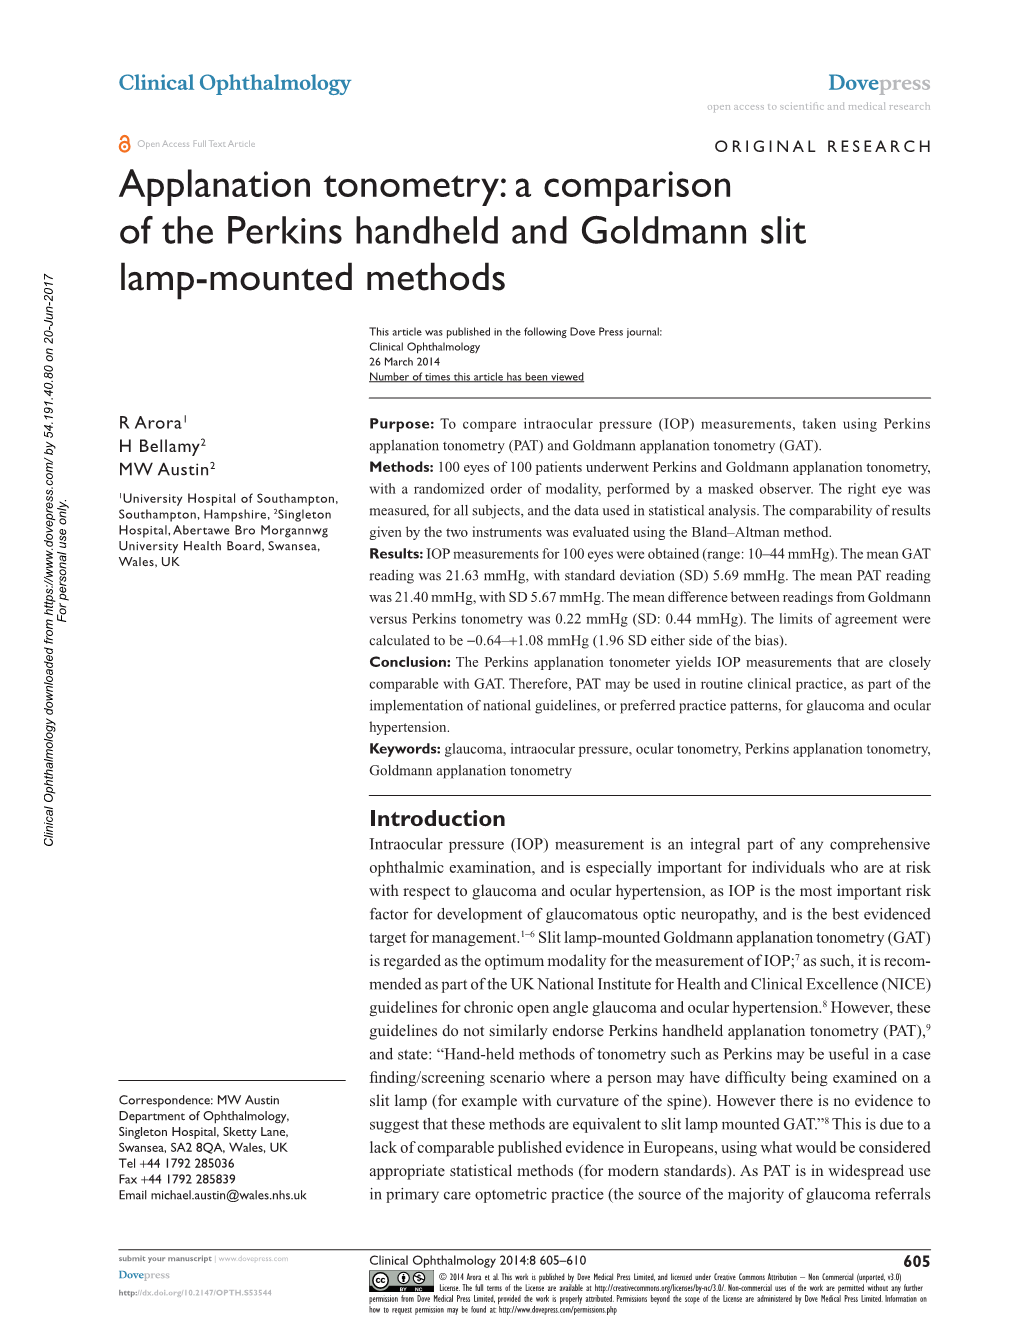 Applanation Tonometry: a Comparison of the Perkins Handheld and Goldmann Slit Lamp-Mounted Methods